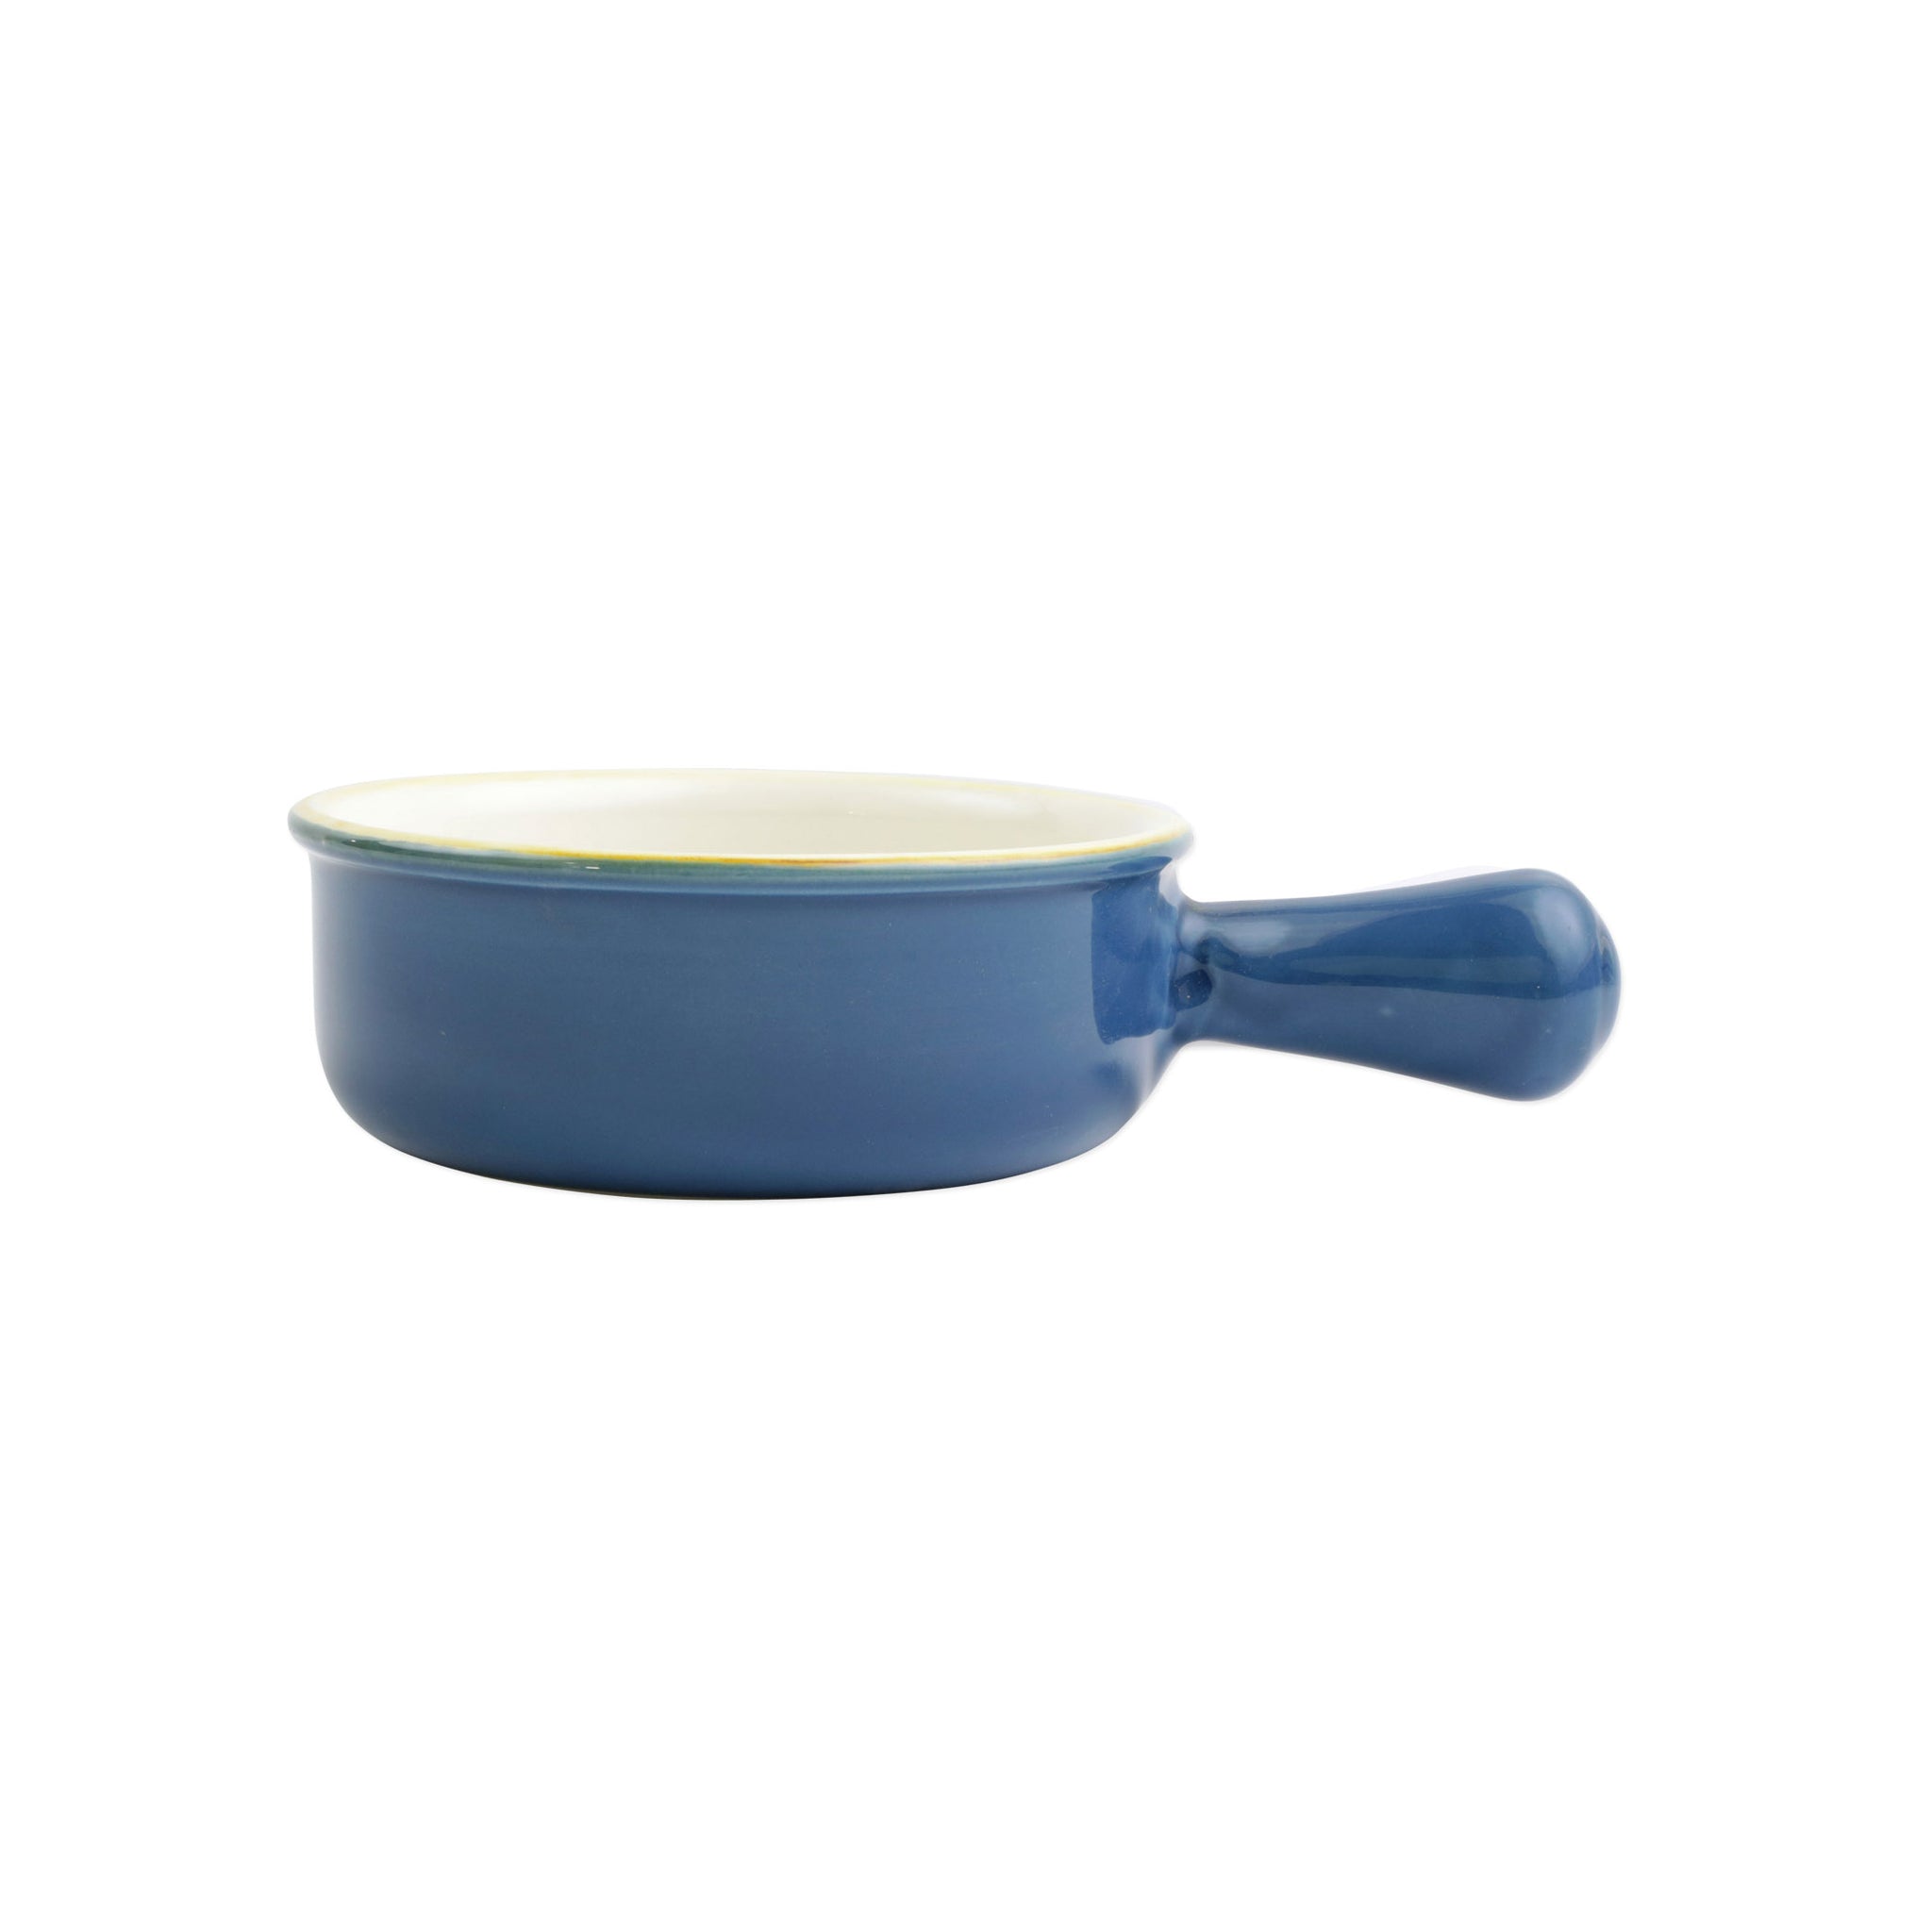 Italian Bakers Small Round Baker with Large Handle - Blue